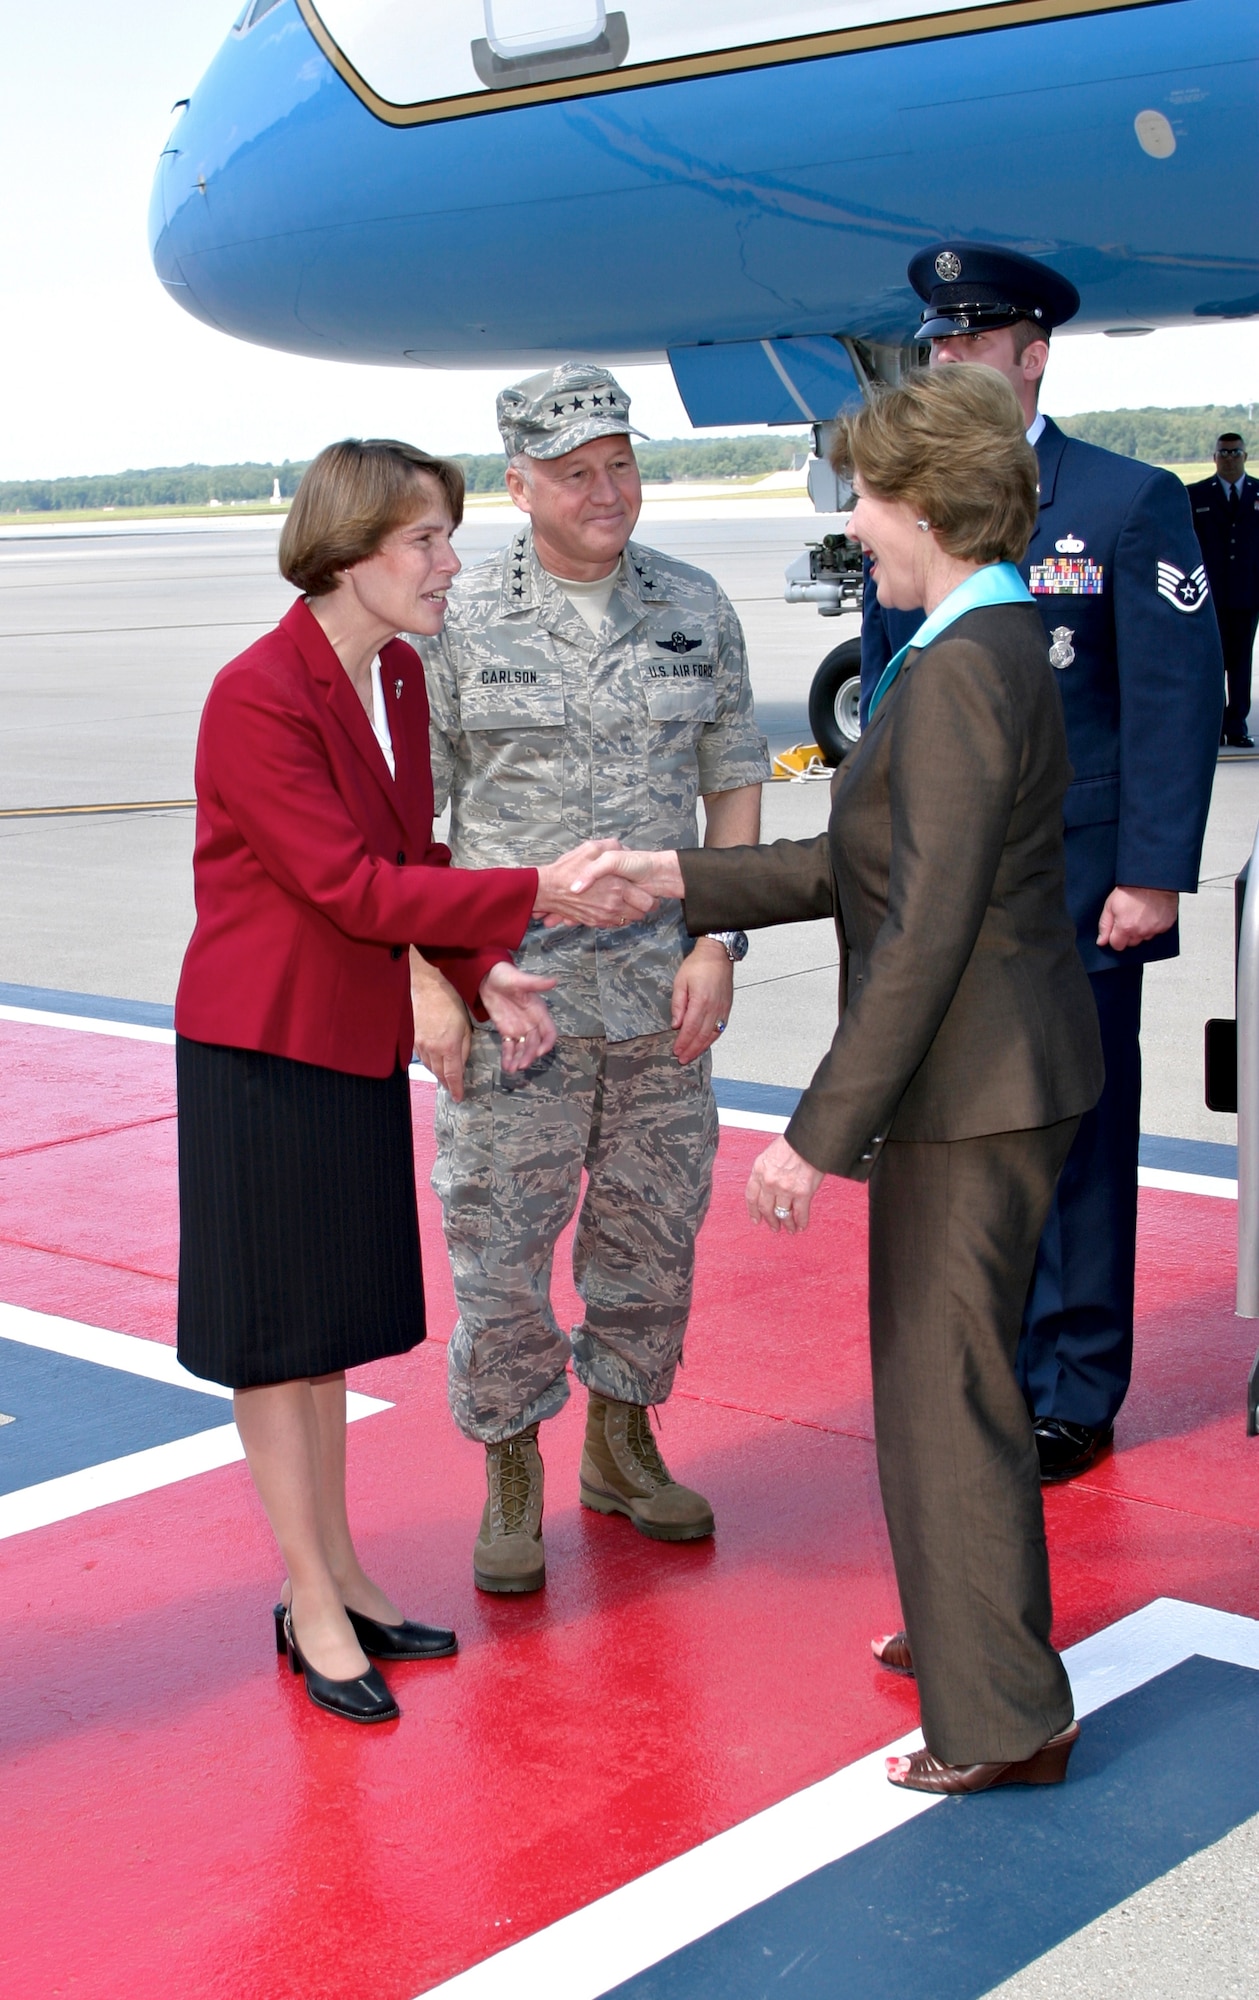 WRIGHT-PATTERSON AIR FORCE BASE, Ohio — Gen. Bruce Carlson, Air Force Materiel Command commander, and wife Vicki greet first lady Laura Bush when Mrs. Bush landed here Wednesday, Aug. 16 on her way to a local event. (Air Force photo by Bernard Strasser)